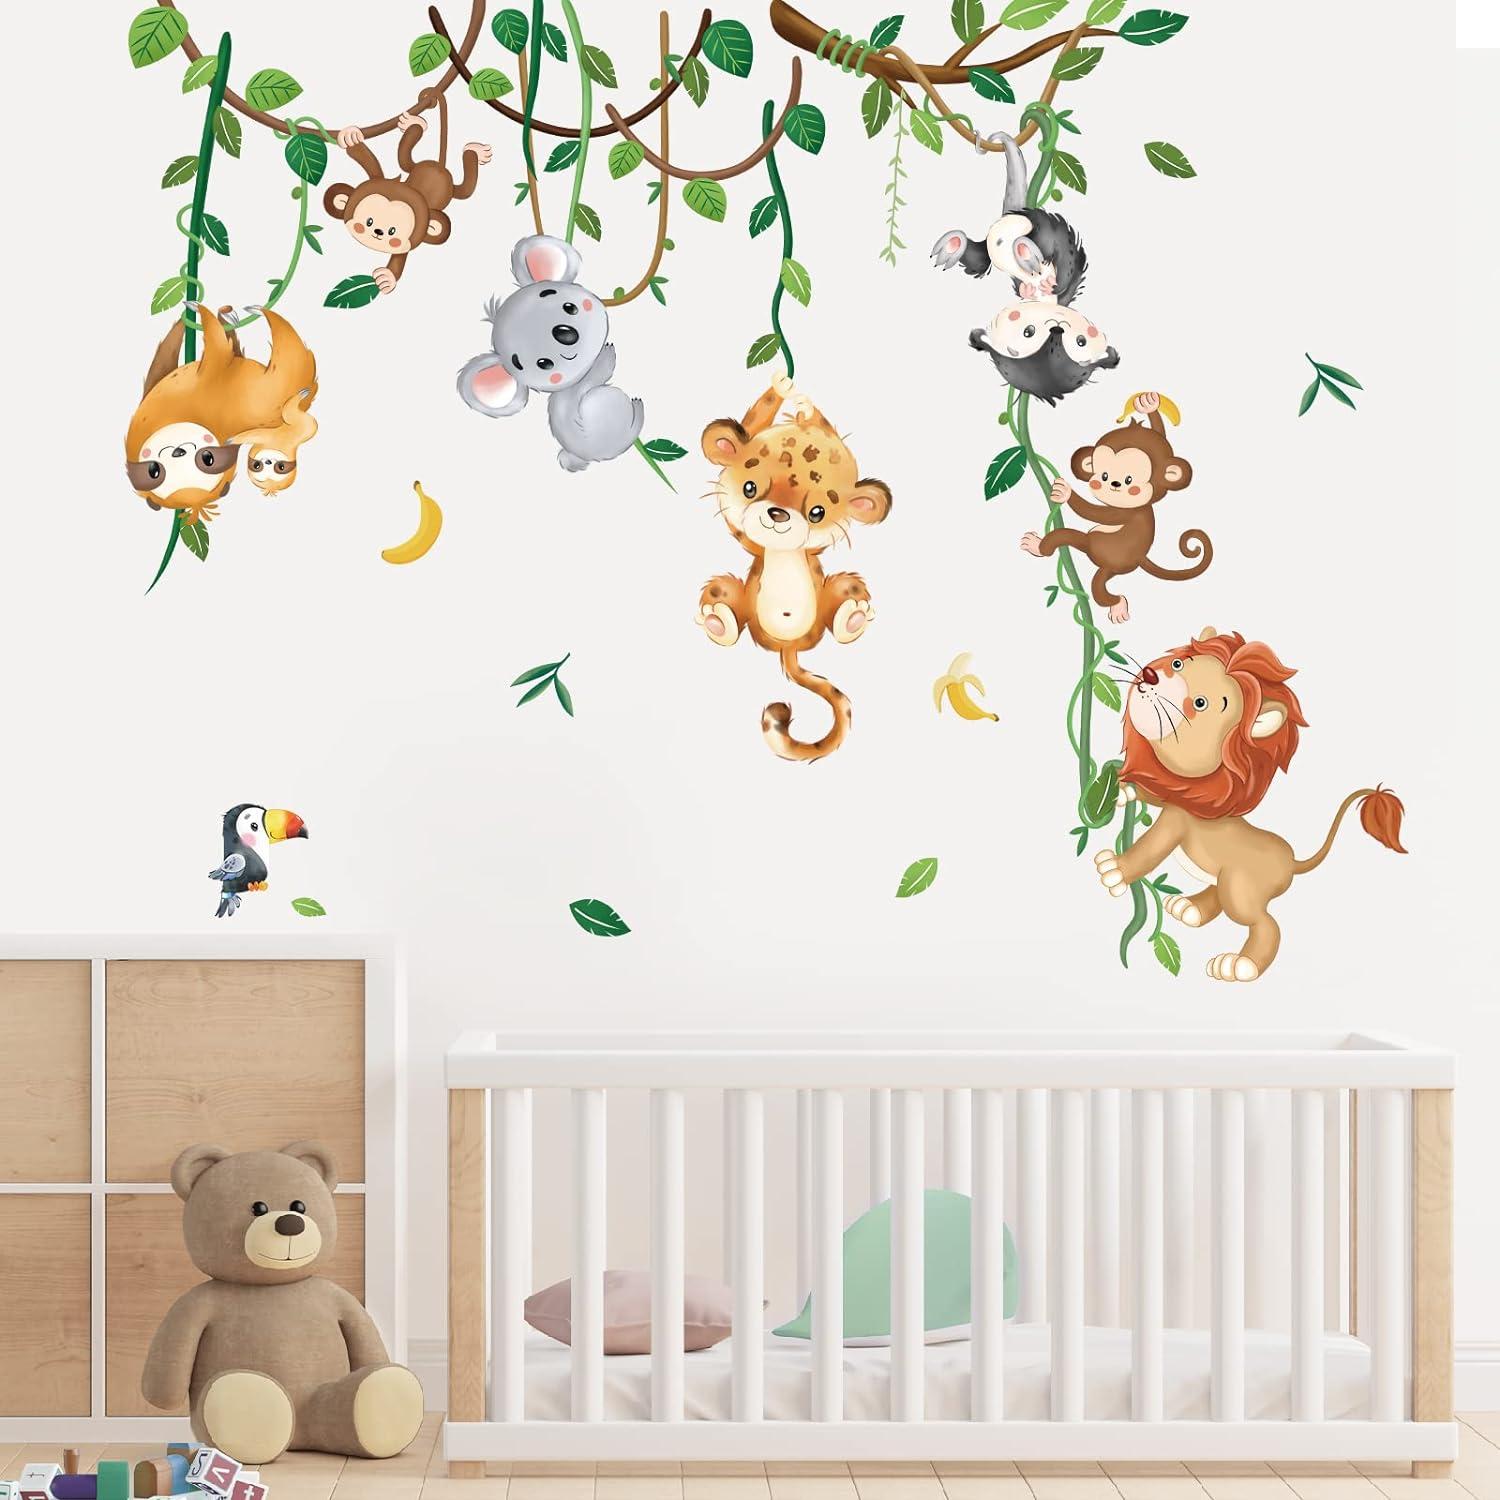 decalmile Jungle Animals Wall Stickers Monkey Lion Safari Wall Decals Baby  Nursery Kids Room Living Room Home Decor